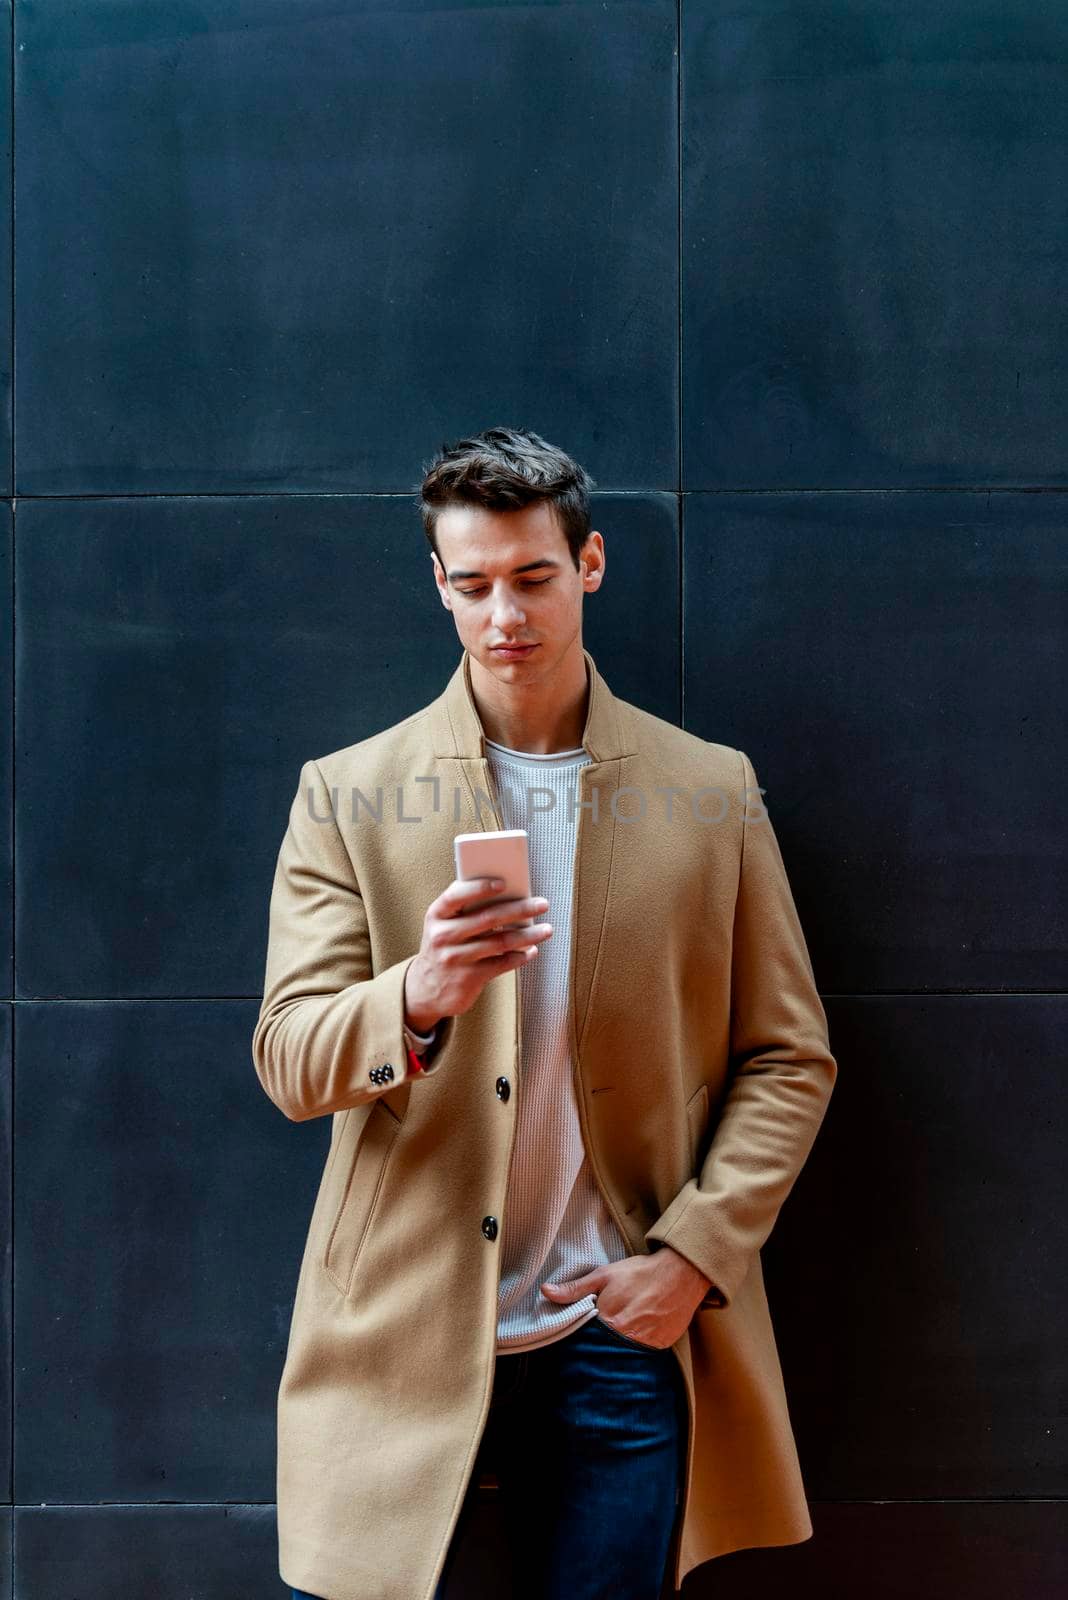 Businessman texting on mobile phone against wall by raferto1973